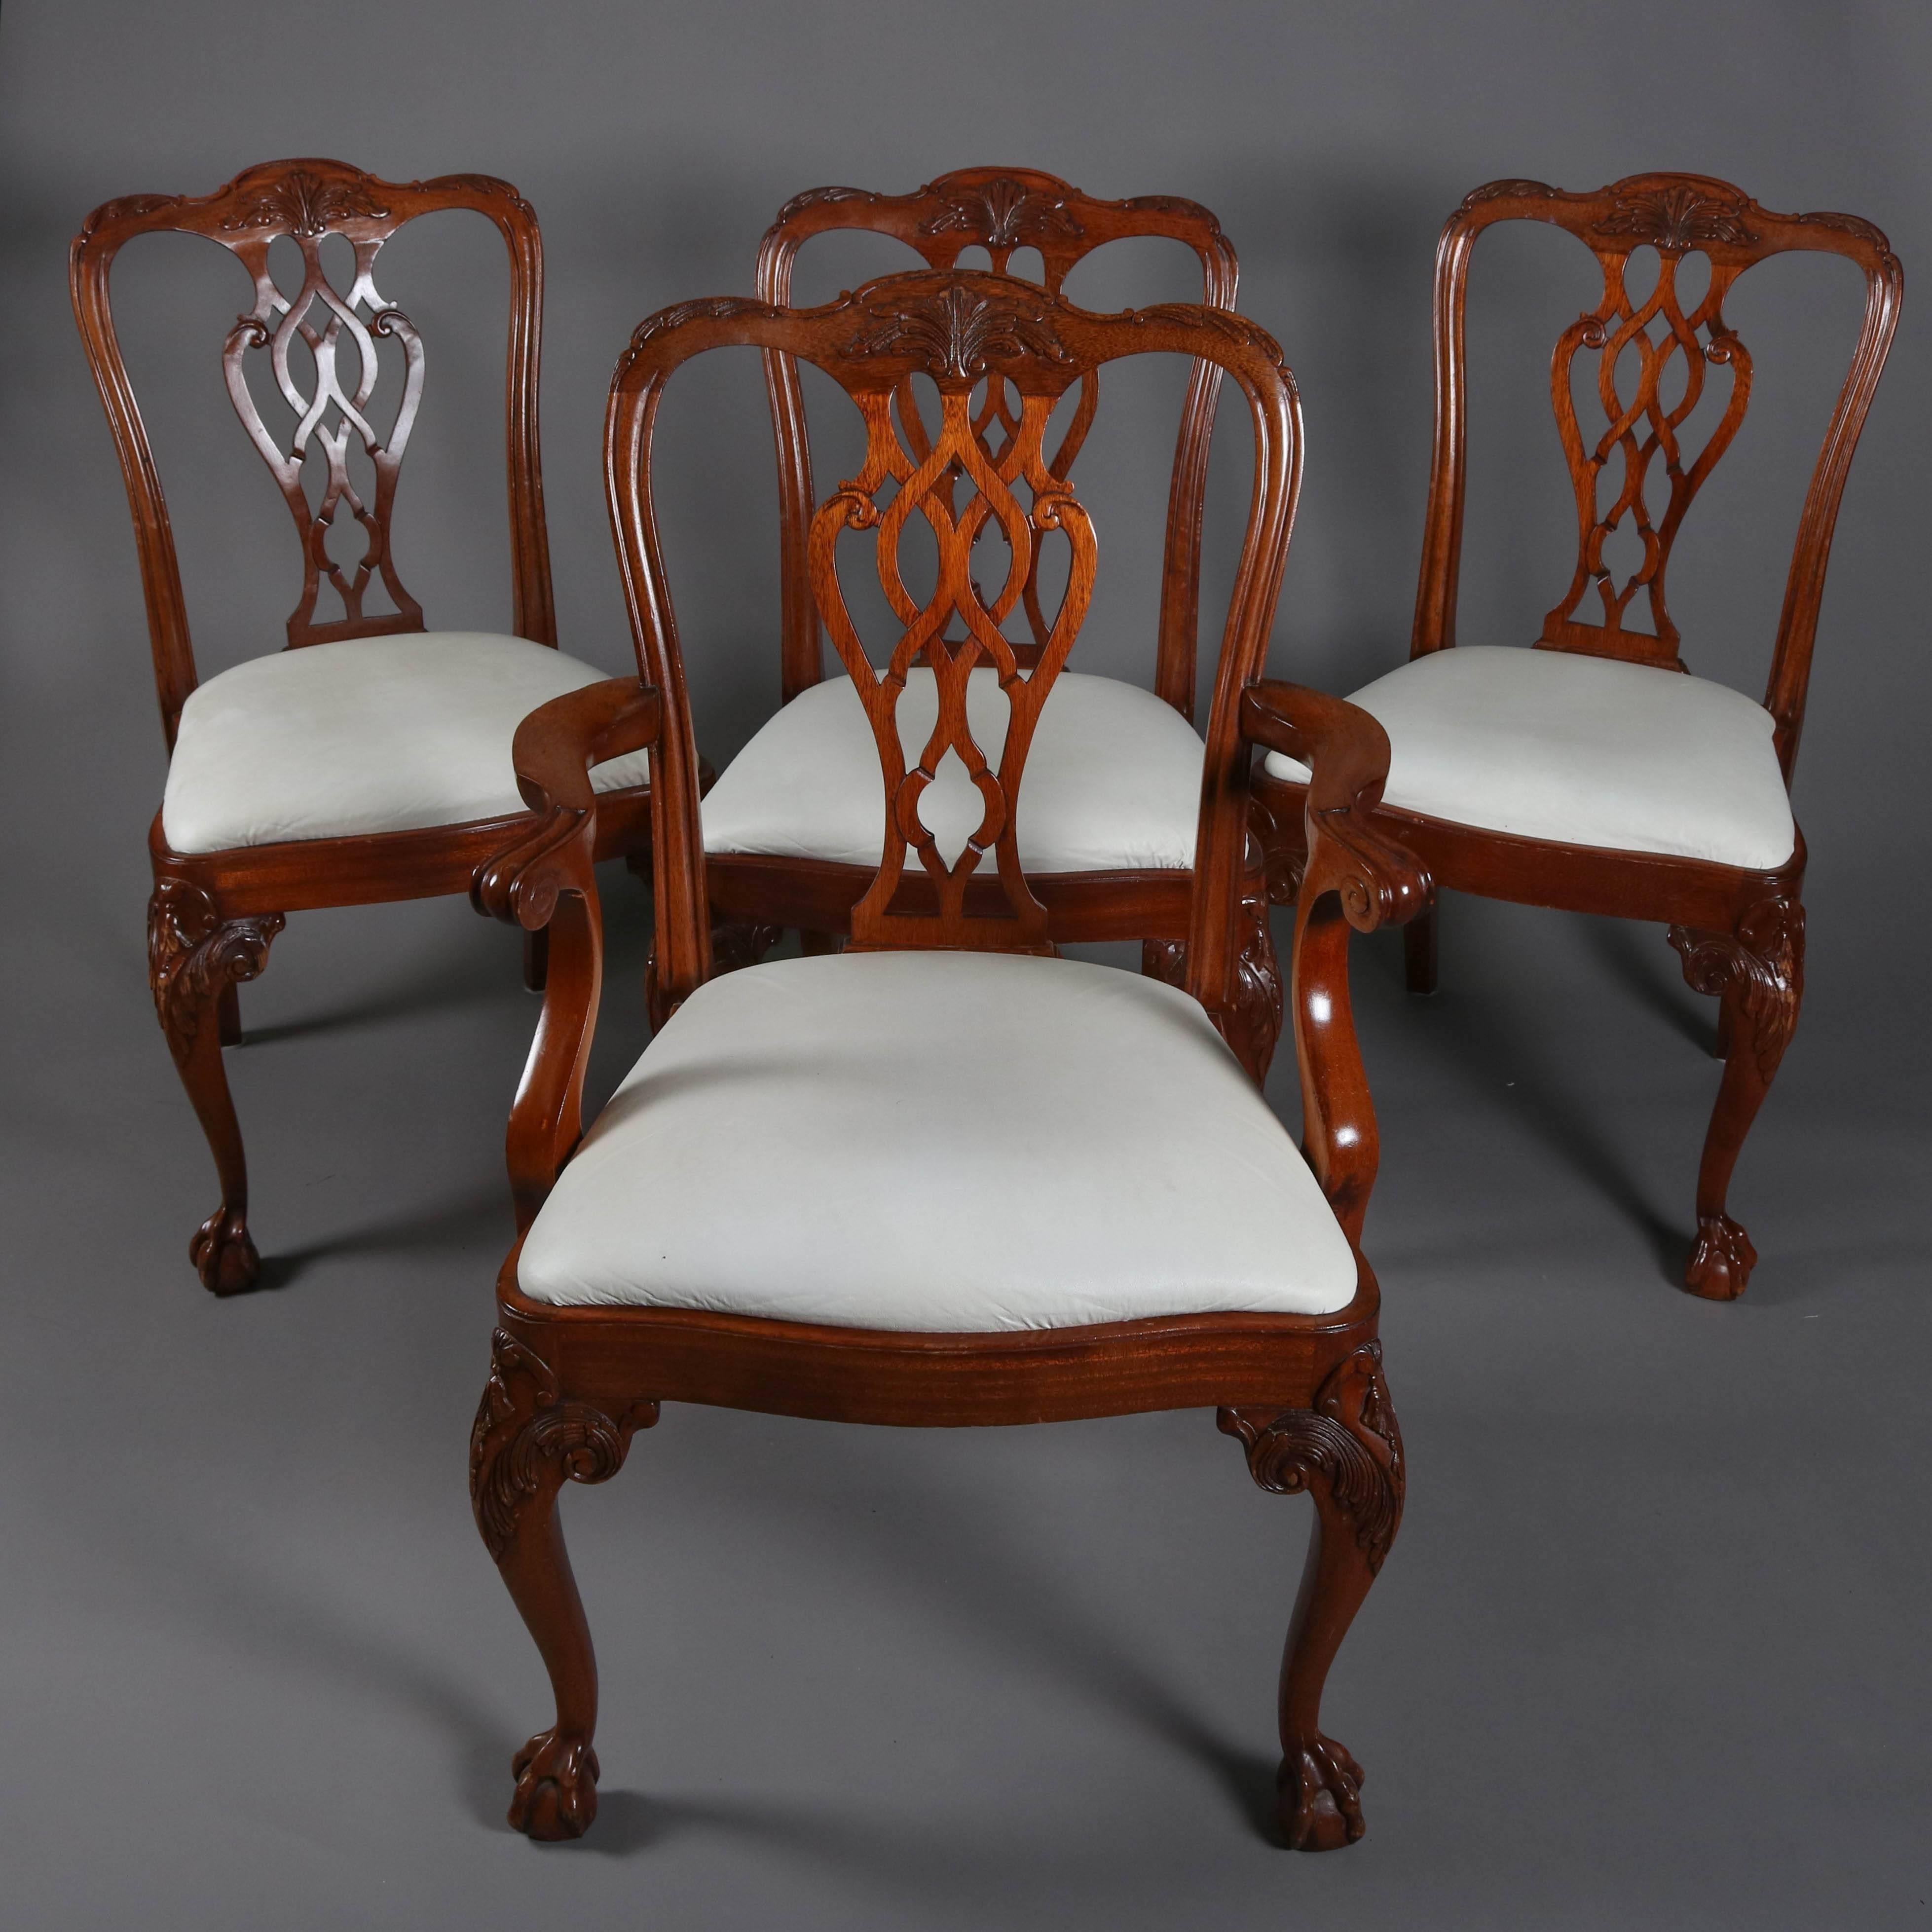 Set of eight Chippendale style flat back carved mahogany dining chairs

Measures: 39" H x 25" W x 22" D, 18" seat, armless: 39" H x 21" W x 18" seat.